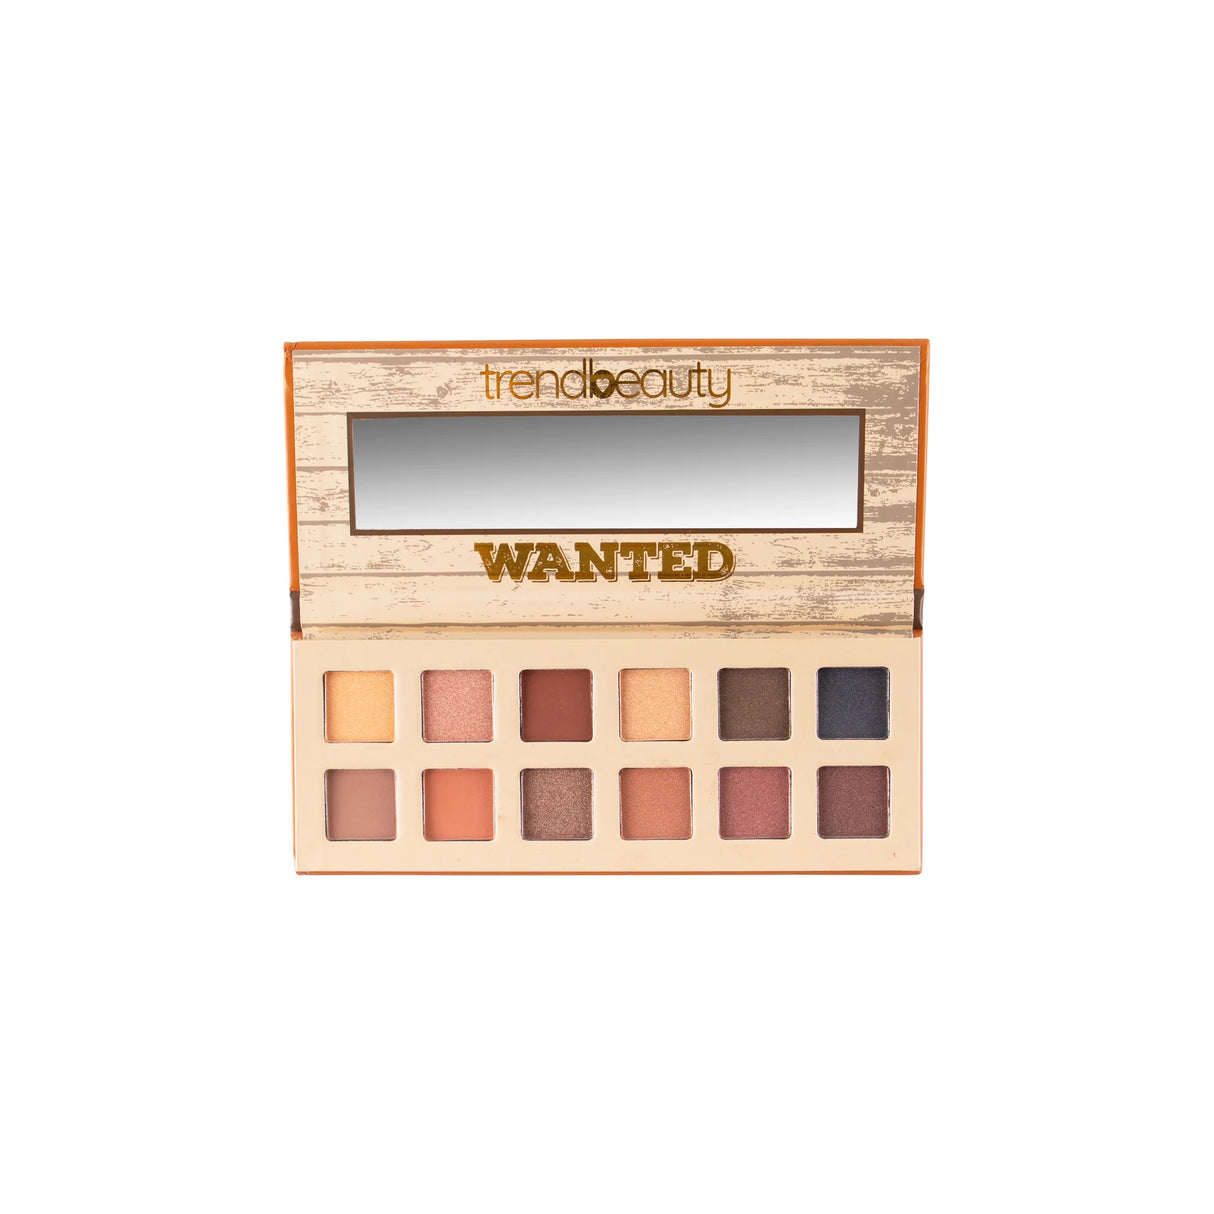 TREND BEAUTY - WANTED EYESHADOW PALETTE  6 PCS - DISPLAY